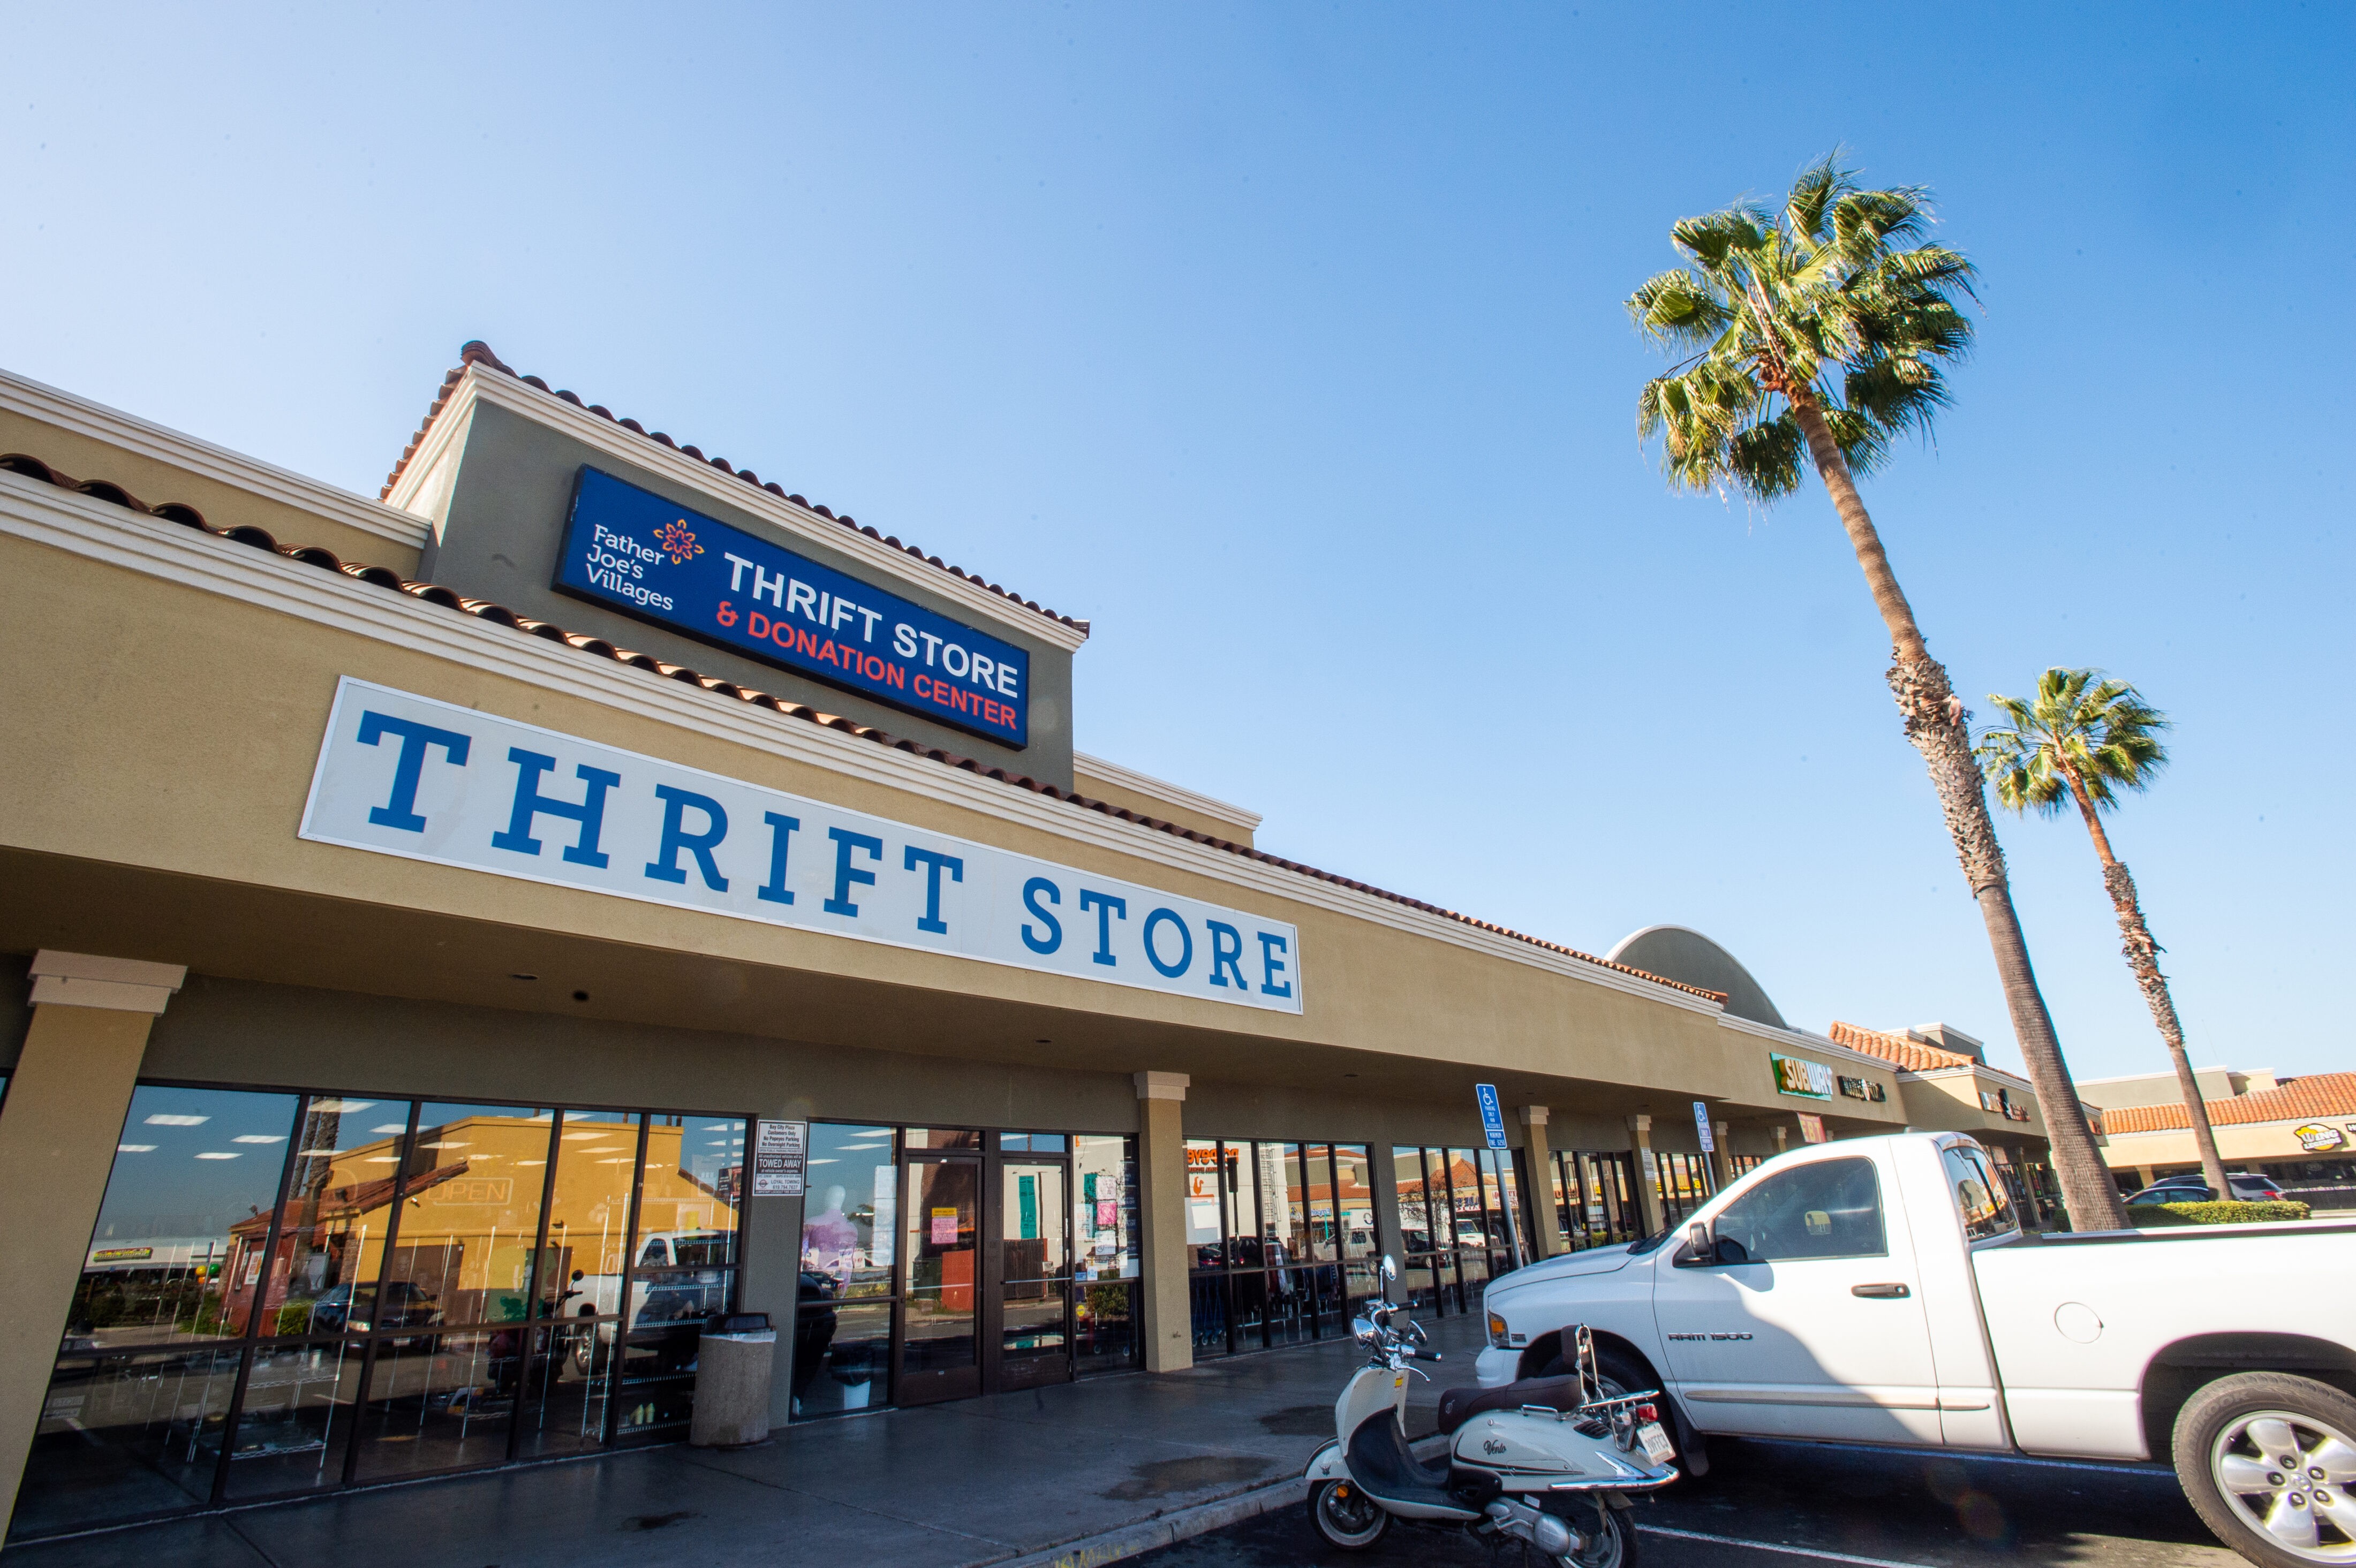 14 Reasons Why You Should Shop at a Thrift Store - Father Joe's